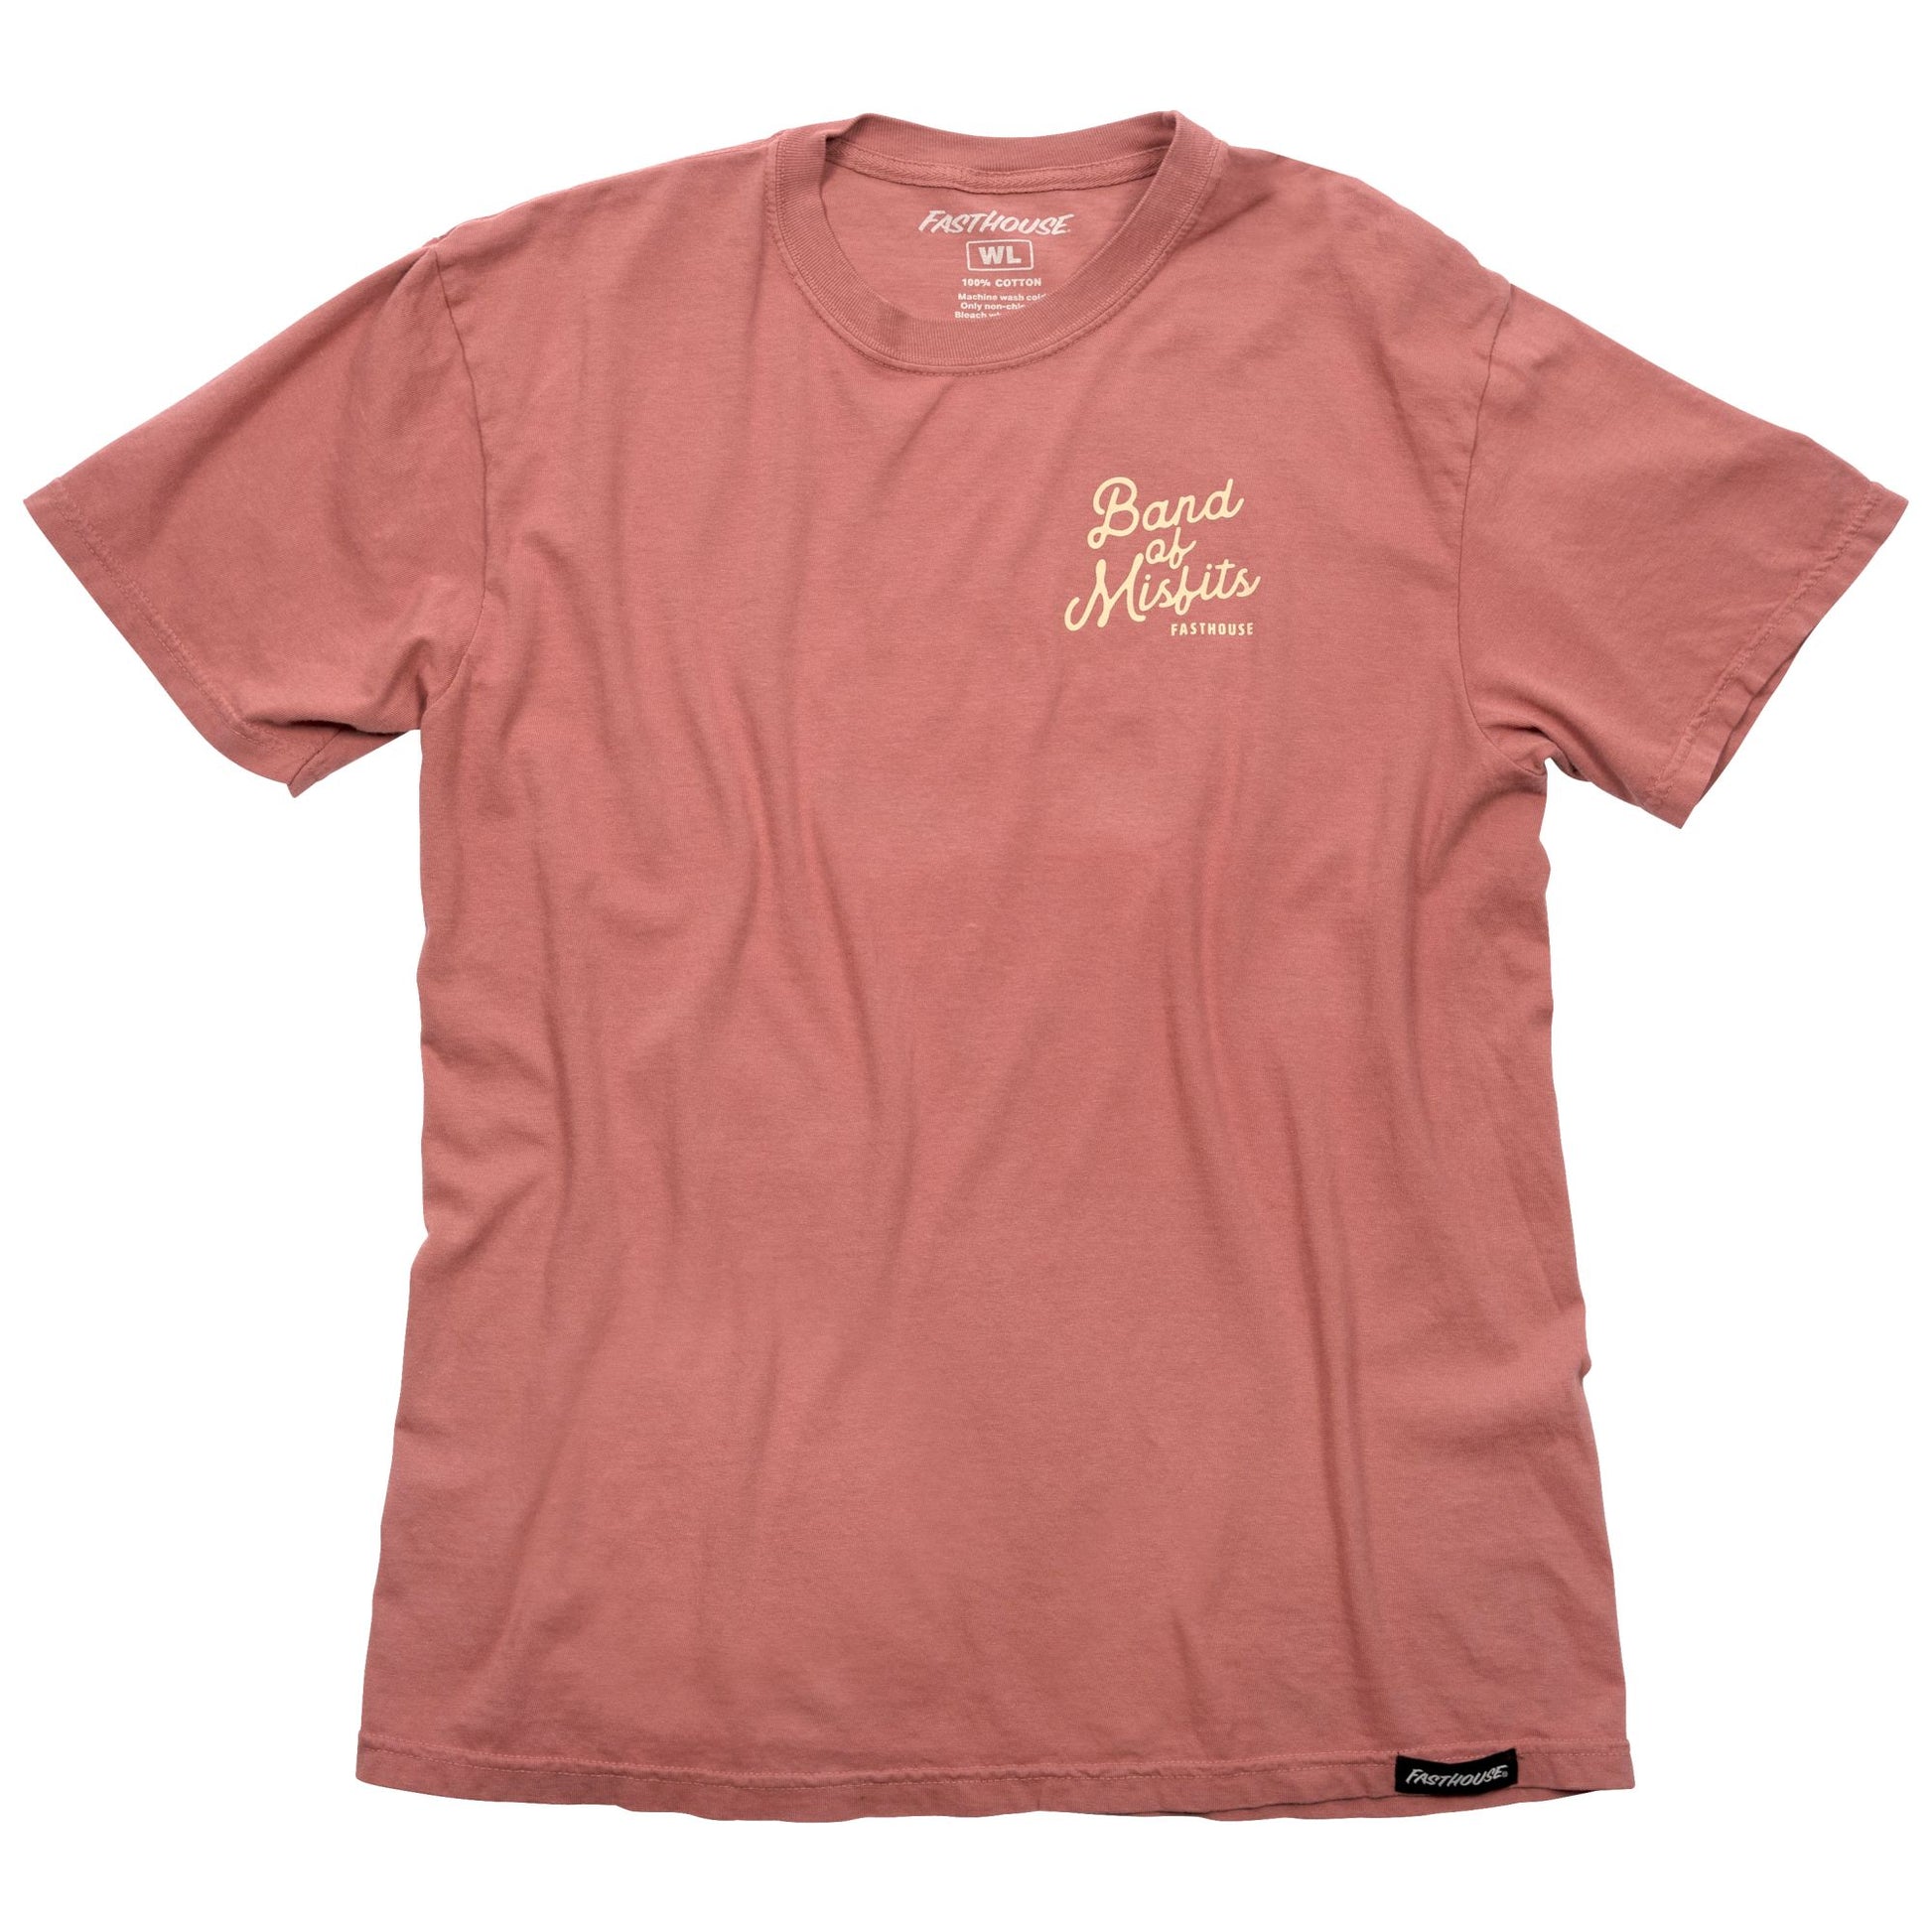 Fasthouse Women's Revival SS Tee Smoked Paprika SS Shirts